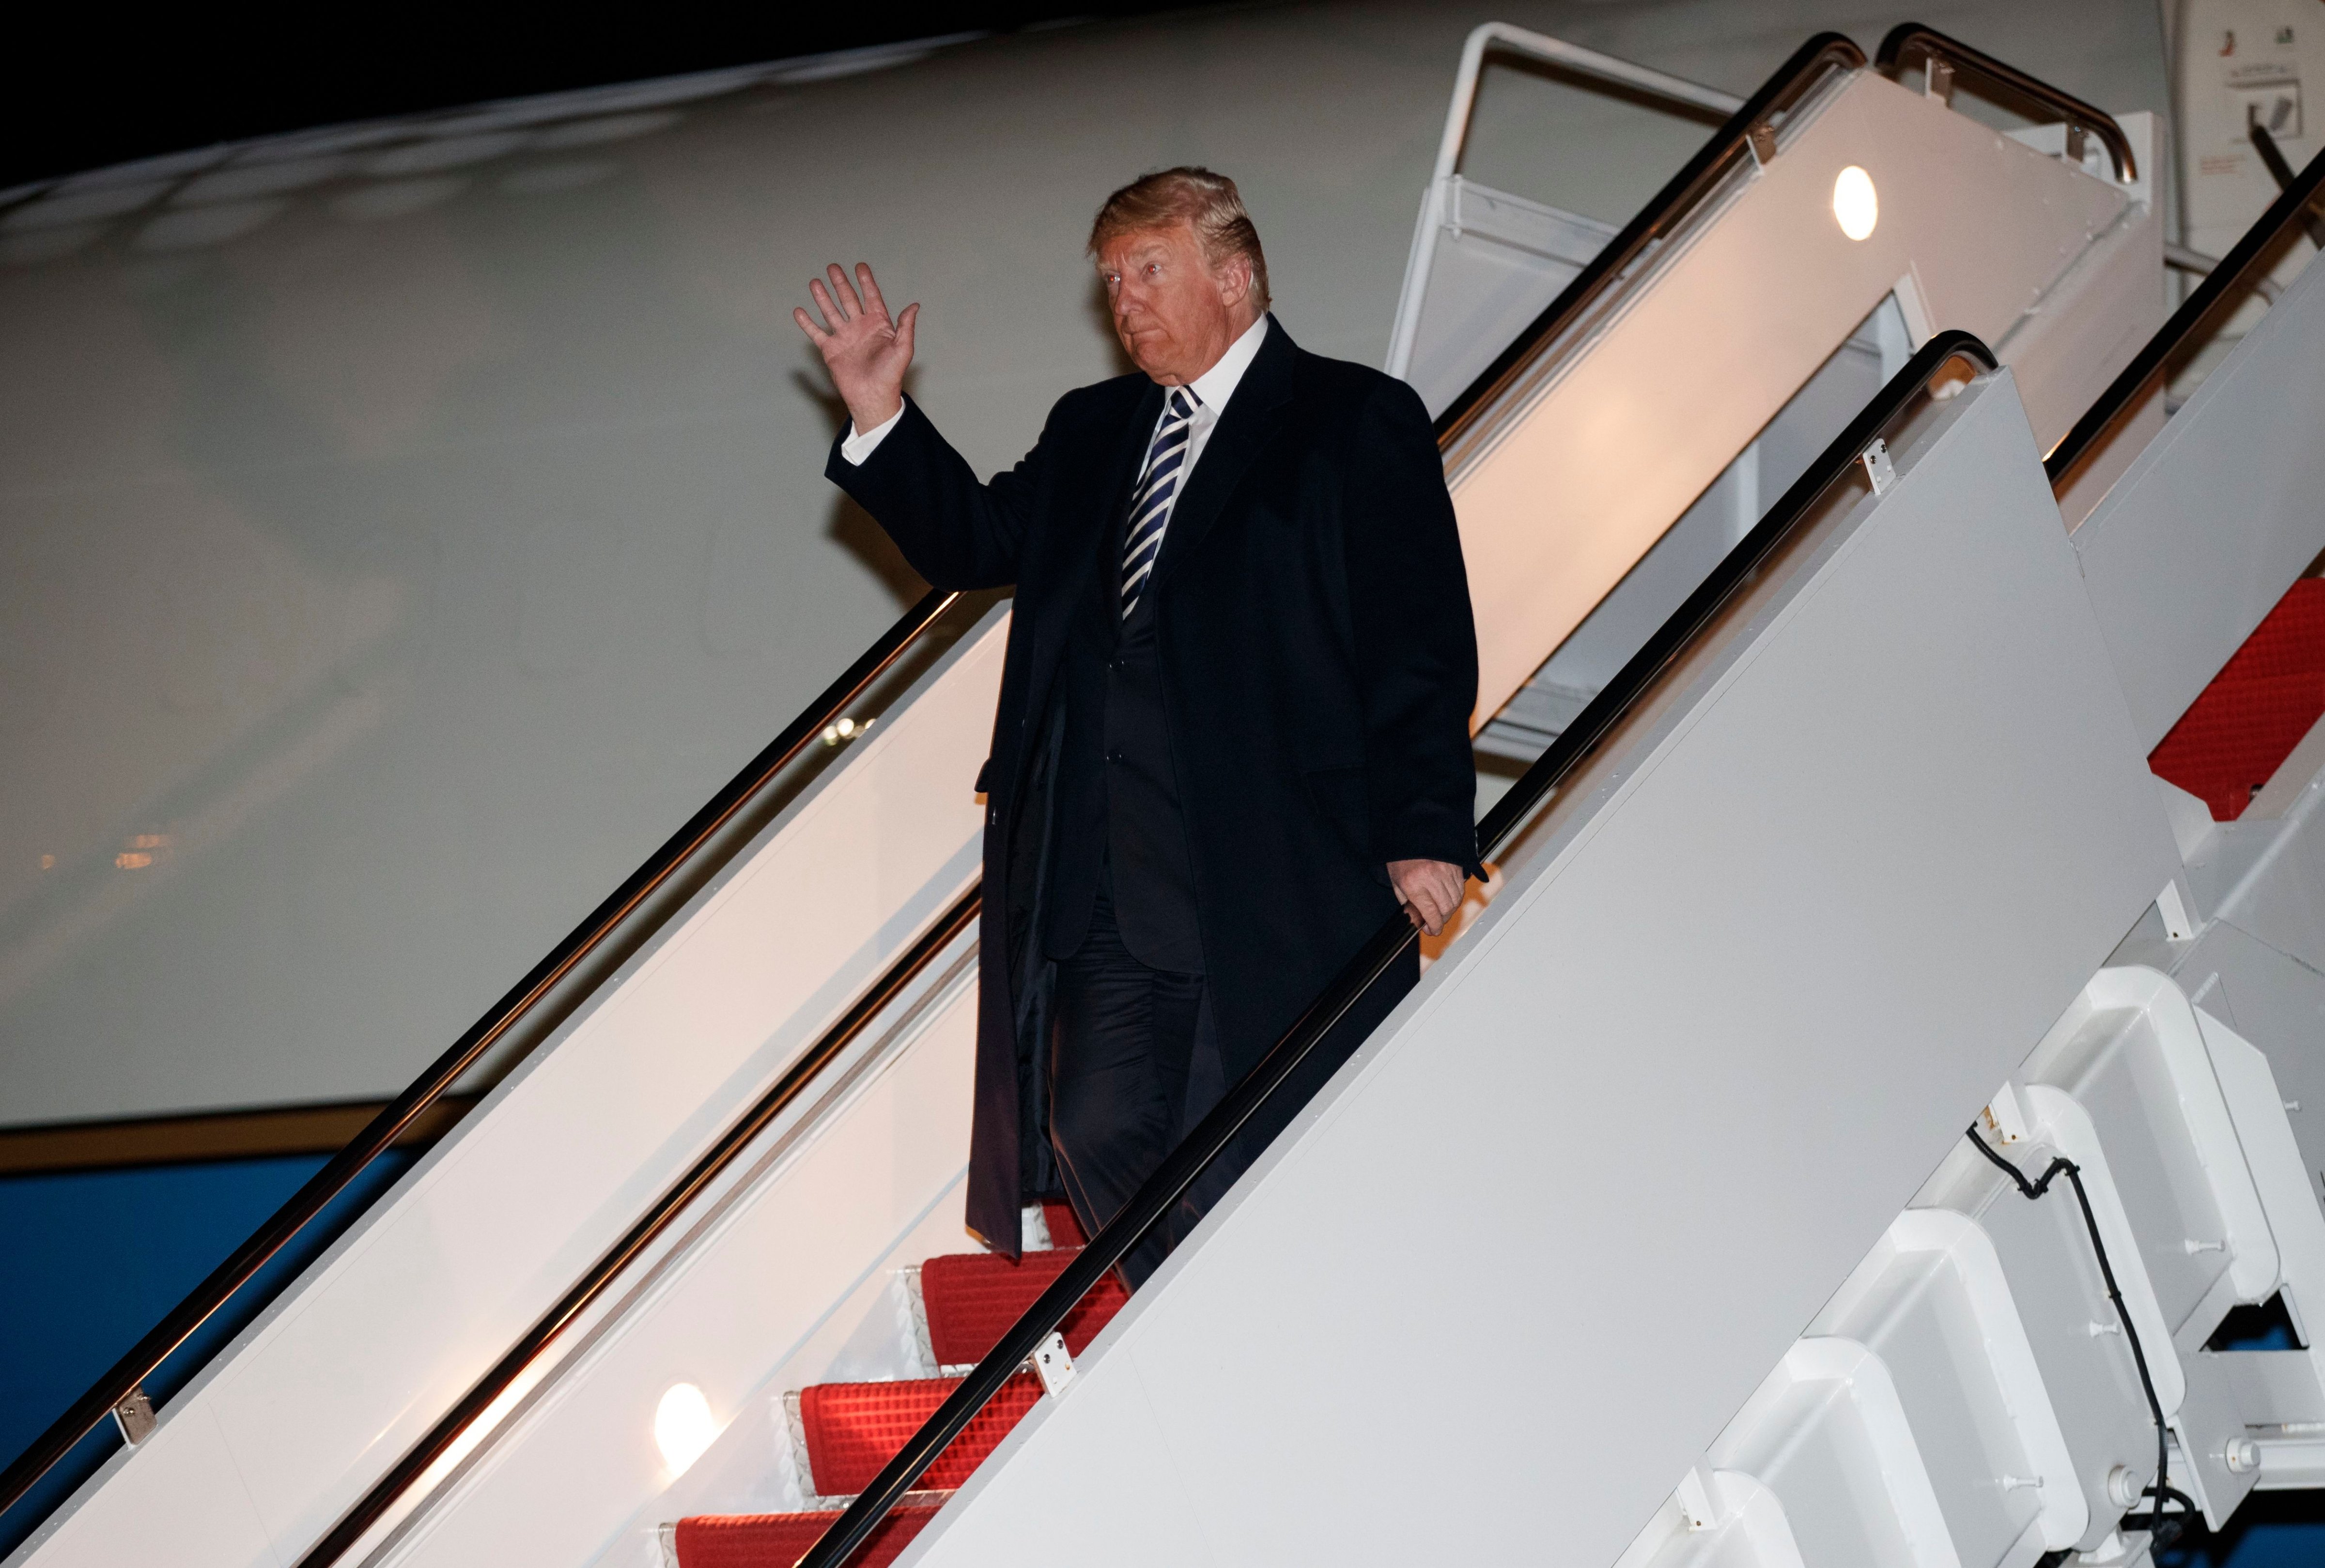 President Donald Trump disembarks from Air Force One, in Andrews Air Force Base, Md., on Oct. 20, 2018. (Carolyn Kaster—AP/REX/Shutterstock)